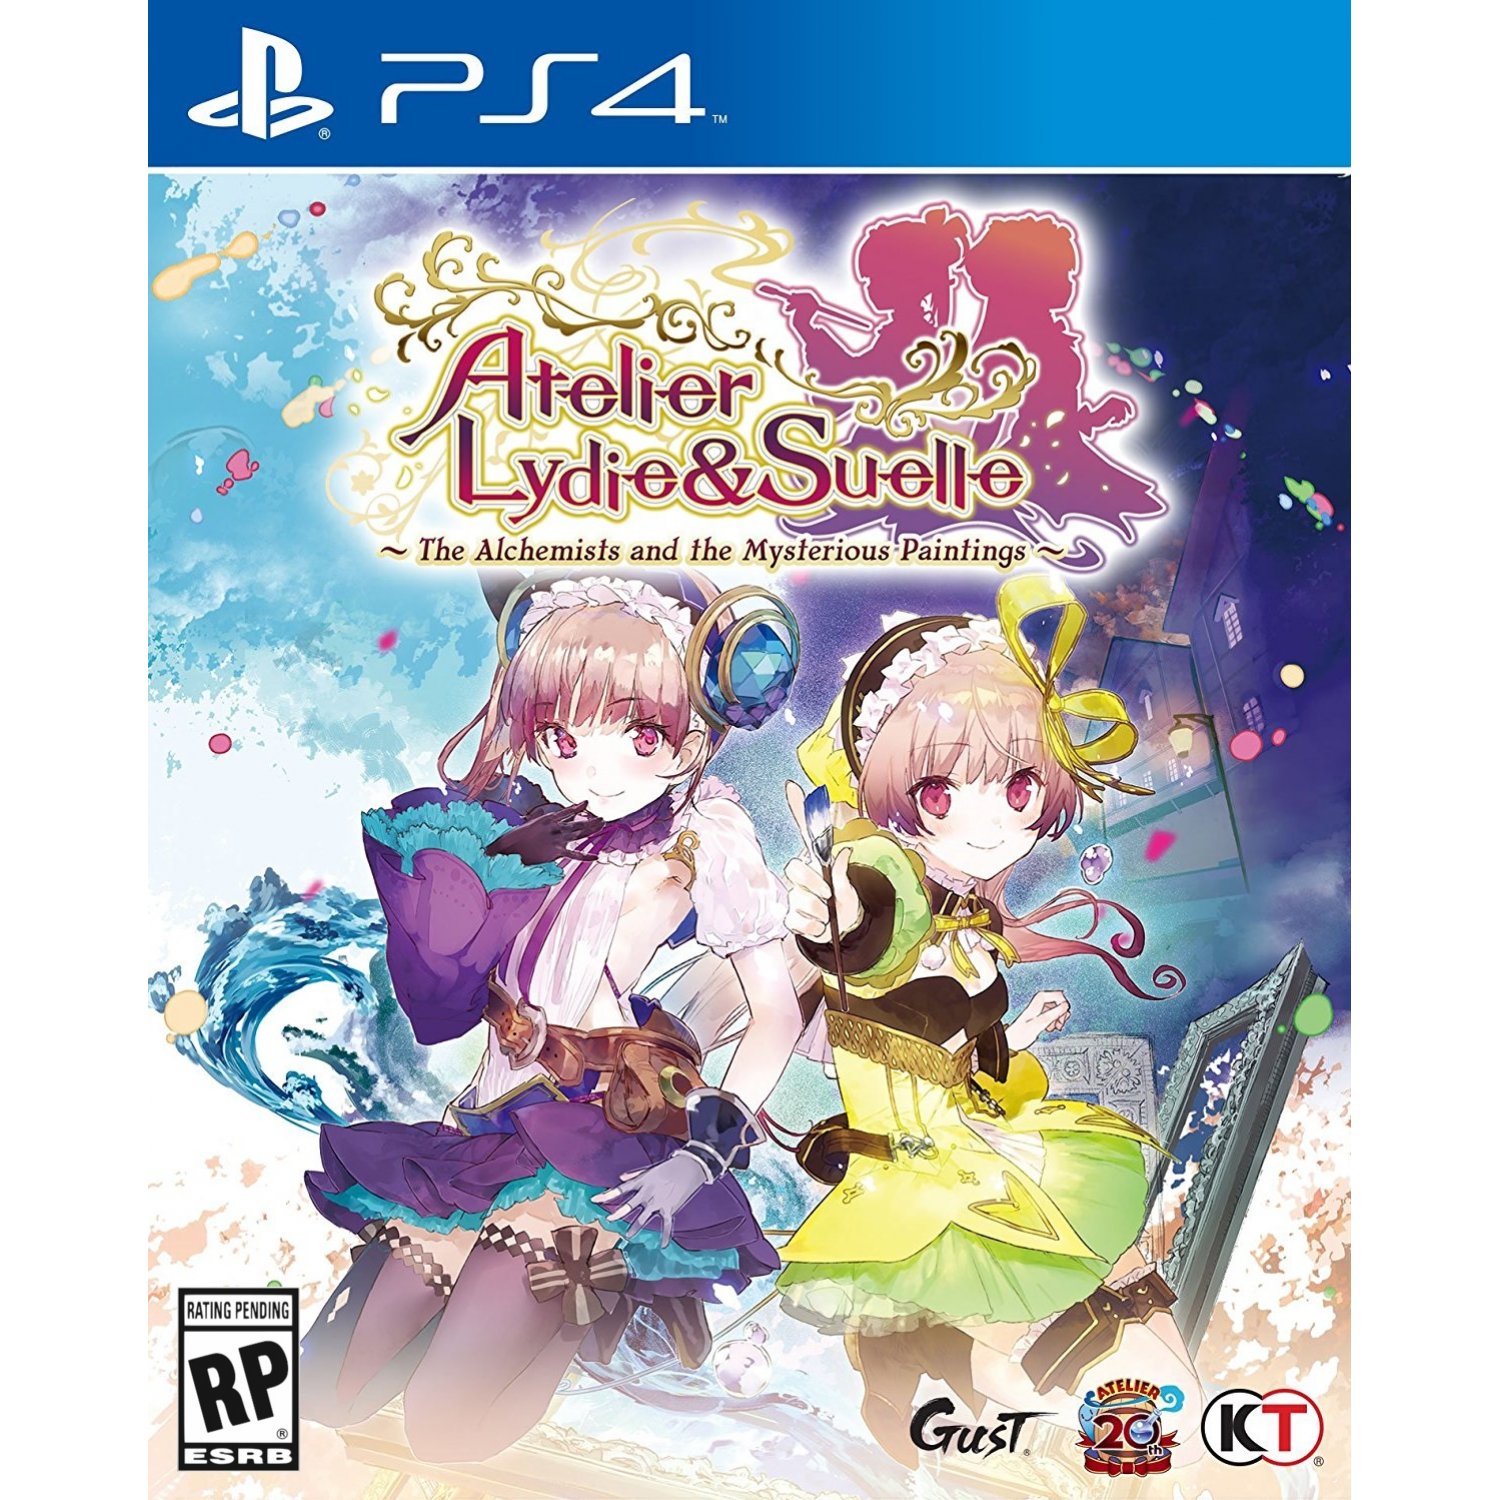 Atelier Lydie & Suelle: Alchemists and the Mysterious Paintings - PS4 title=Atelier Lydie & Suelle: Alchemists and the Mysterious Paintings - PS4